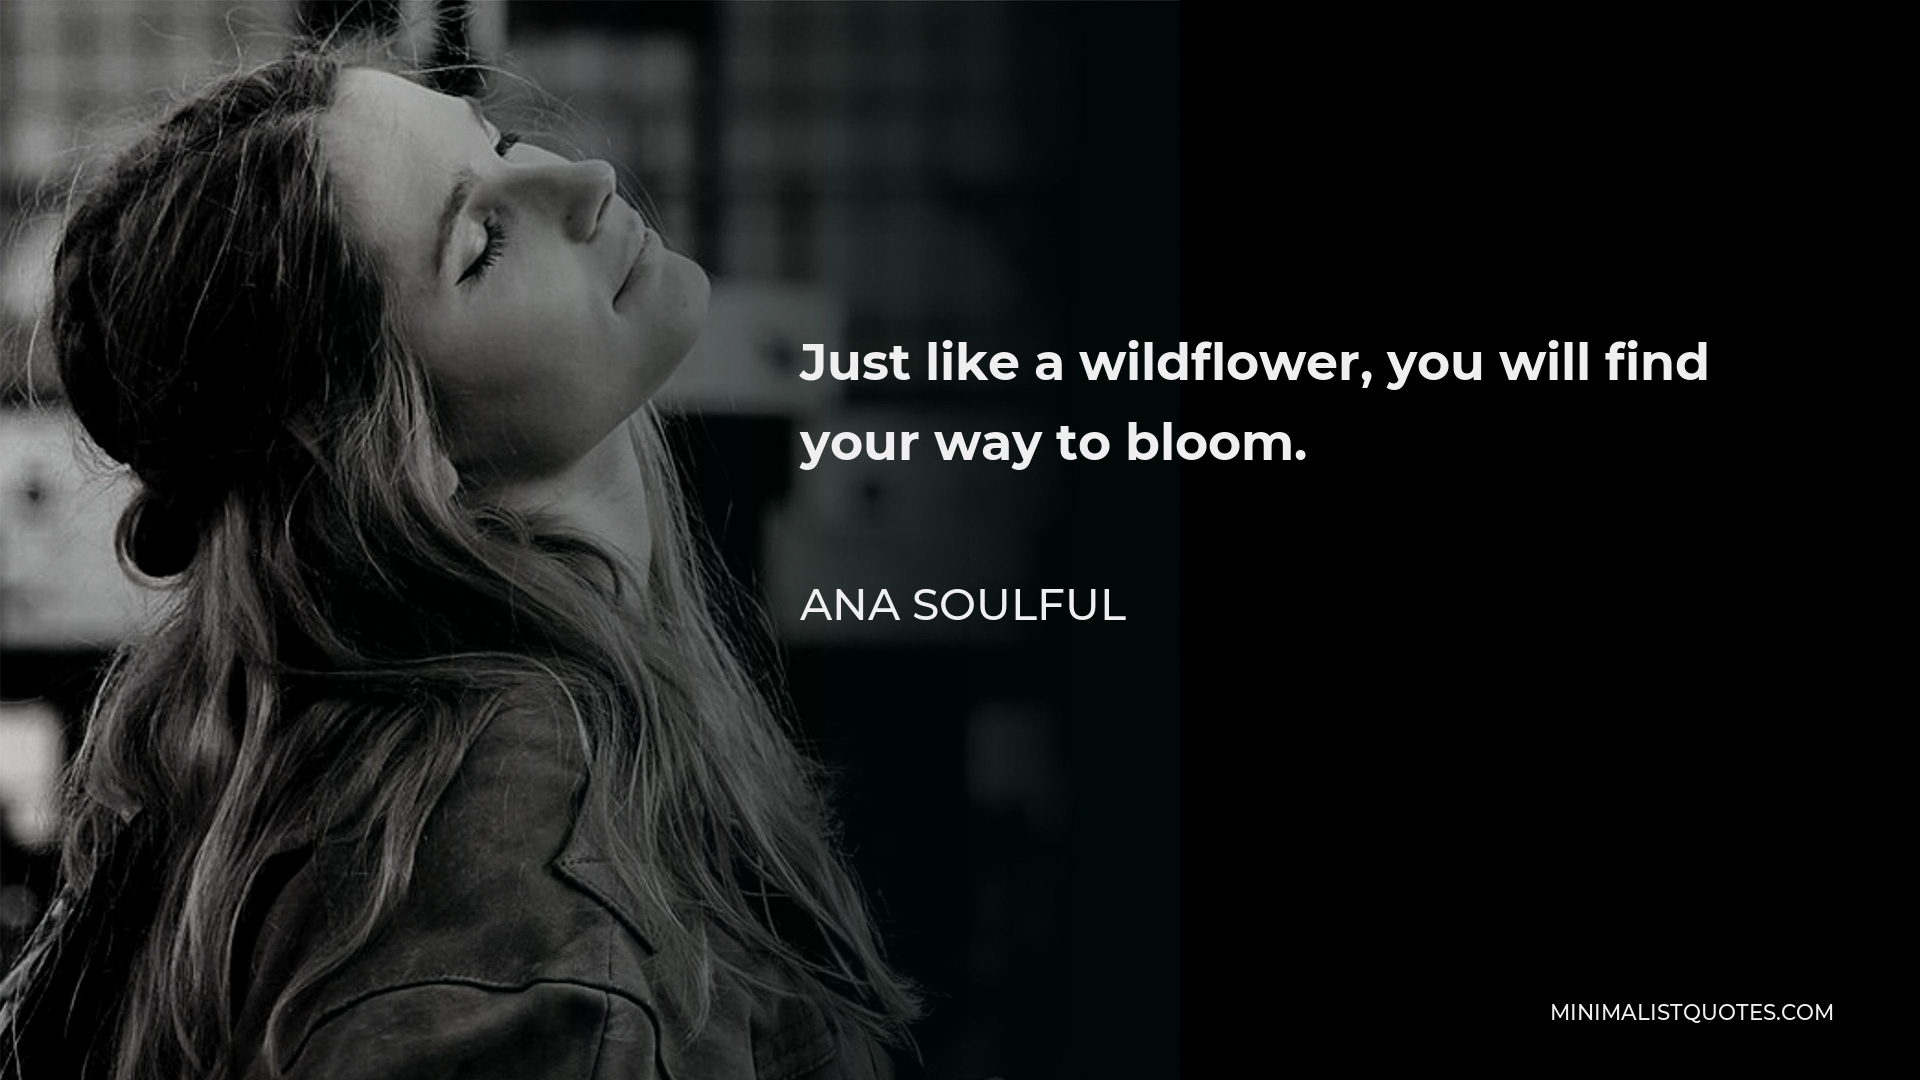 Ana Soulful Quote - Just like a wildflower, you will find your way to bloom.